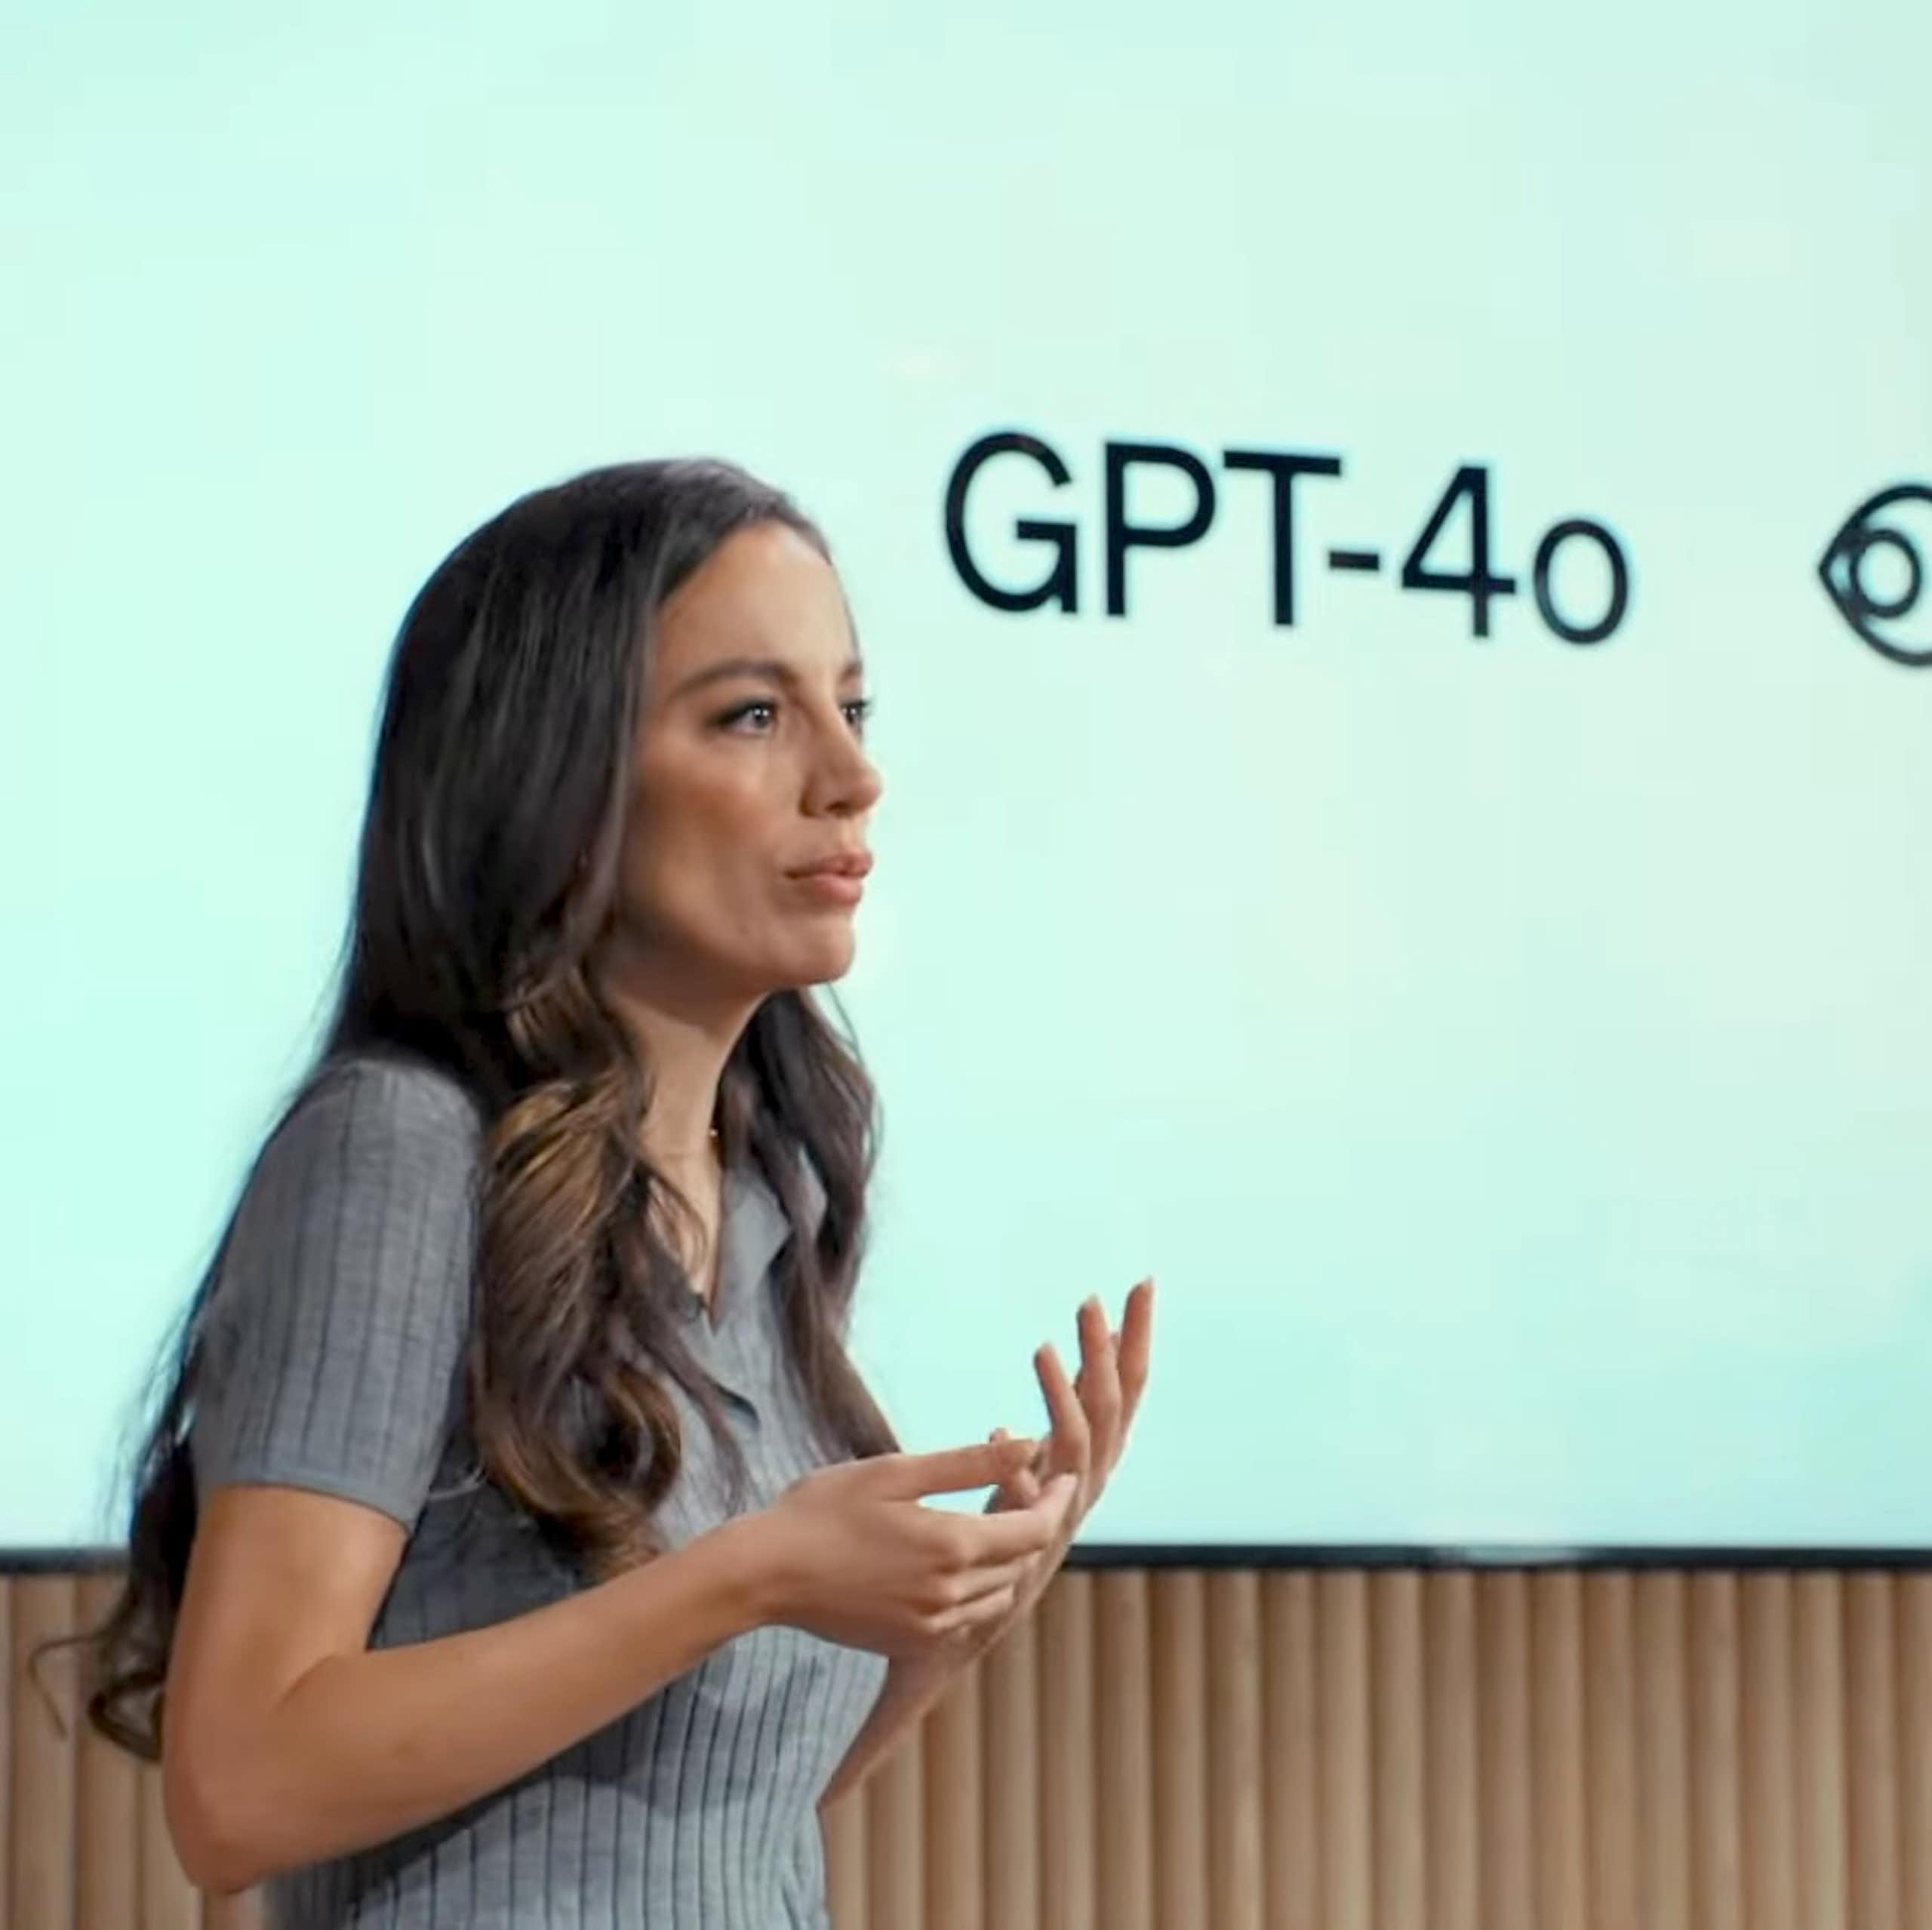 A photo of a woman talking in front of a screen showing 'GPT-4o'.